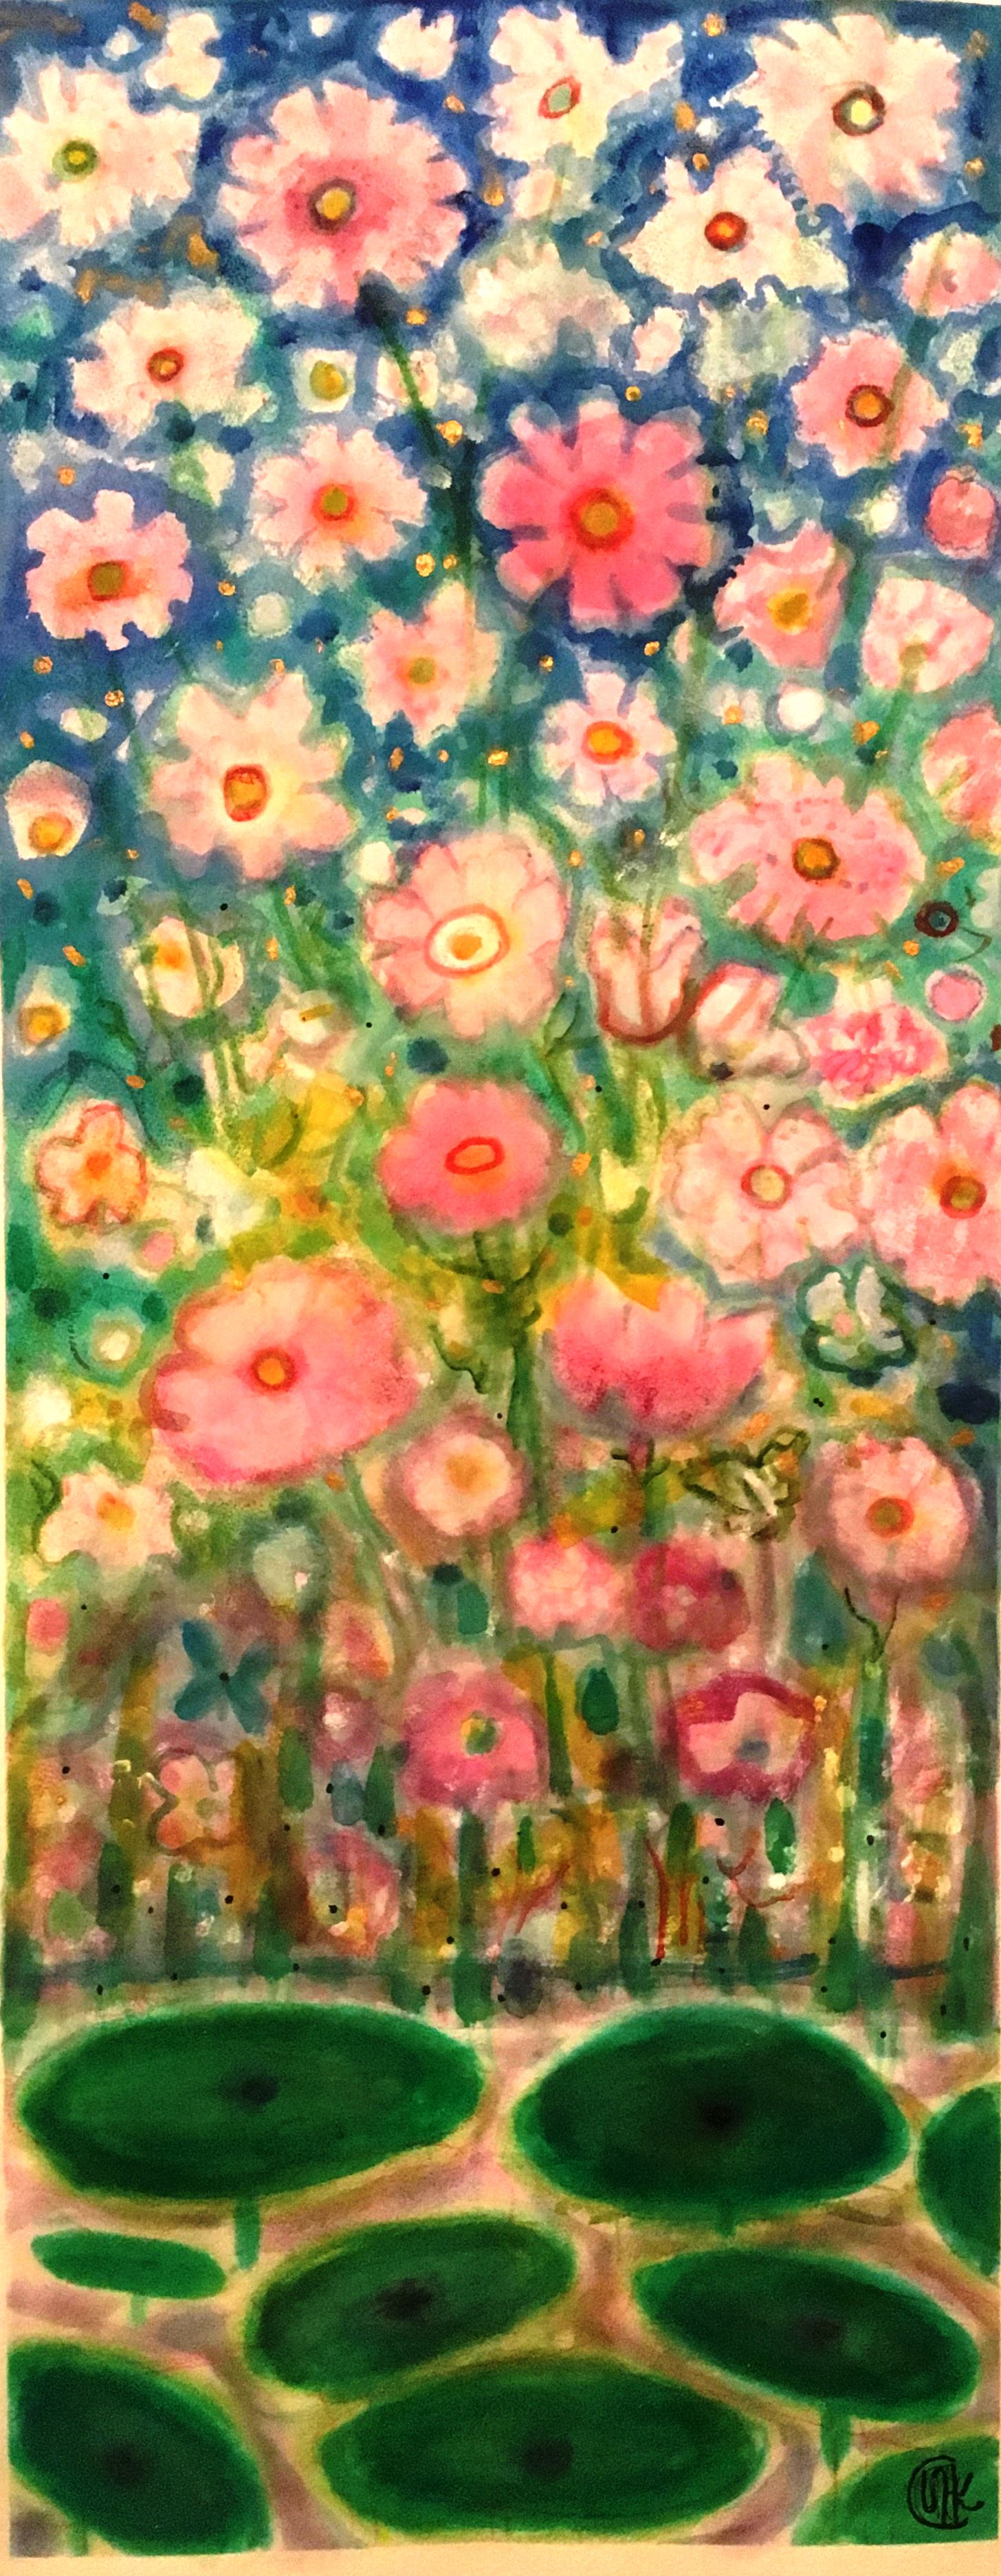 Cosmos by the Pond